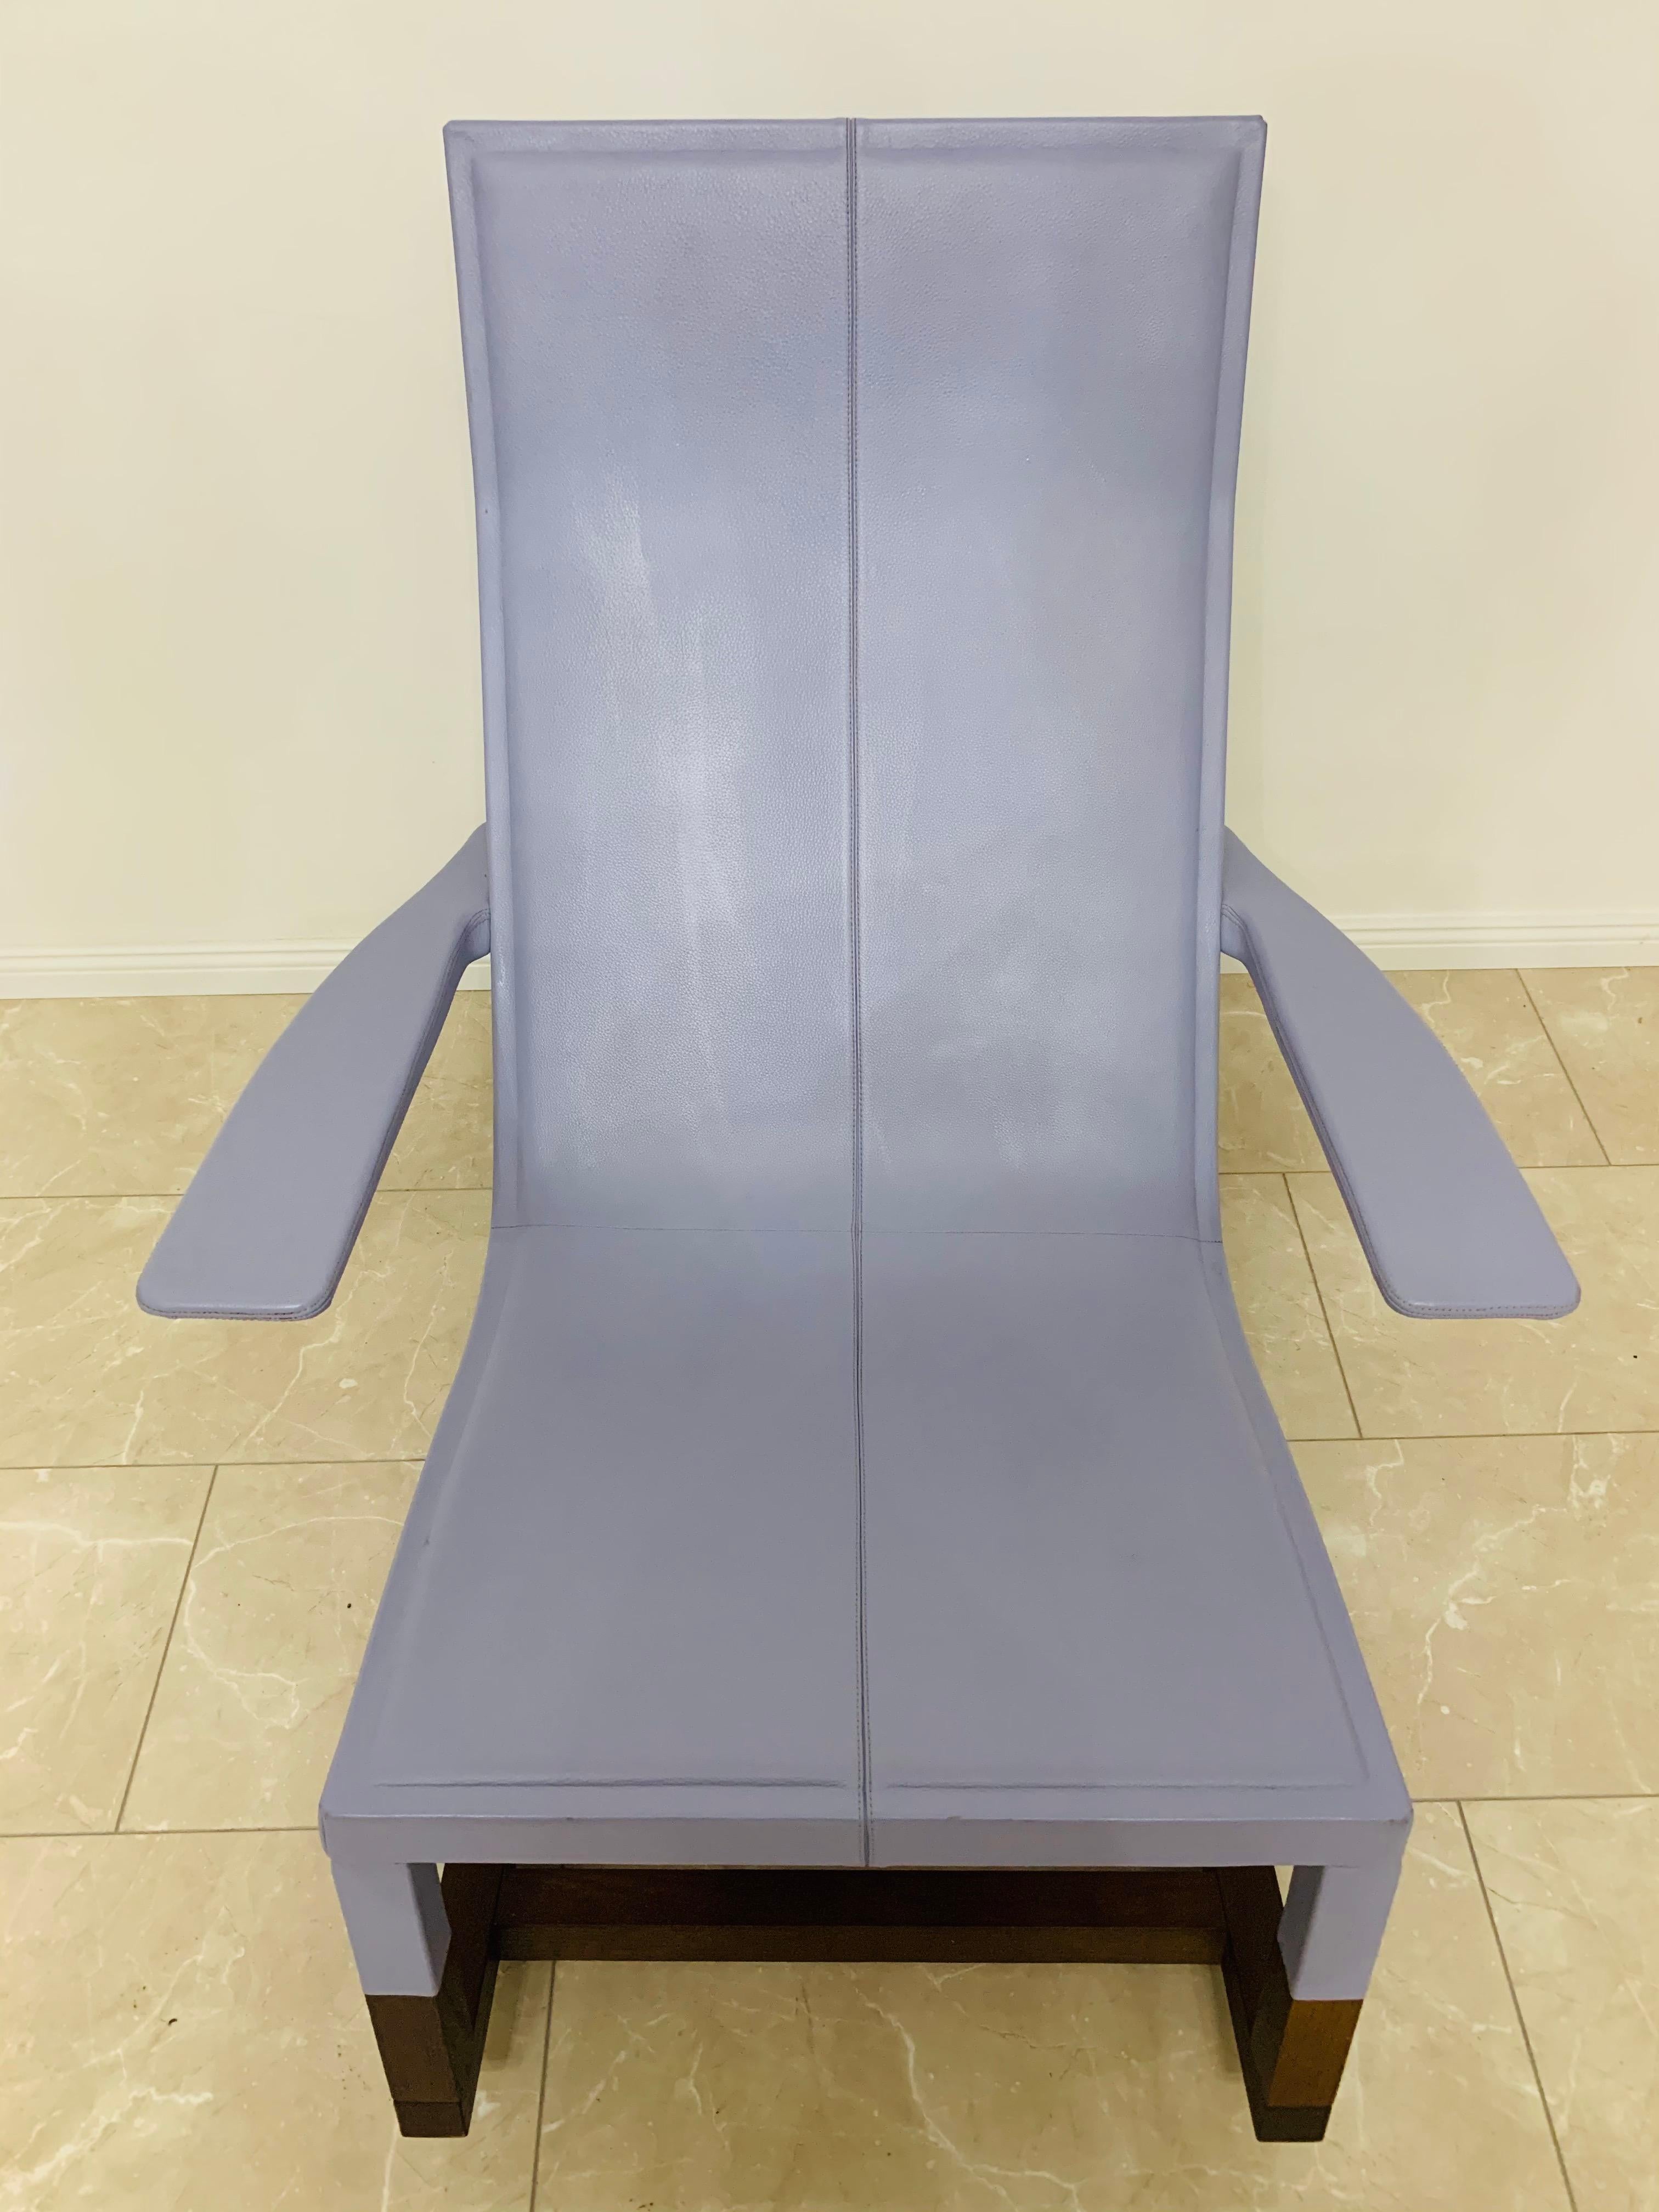 Leather exclusive original Designer Chair light blue leather Poltrona Frau Don'Do  For Sale